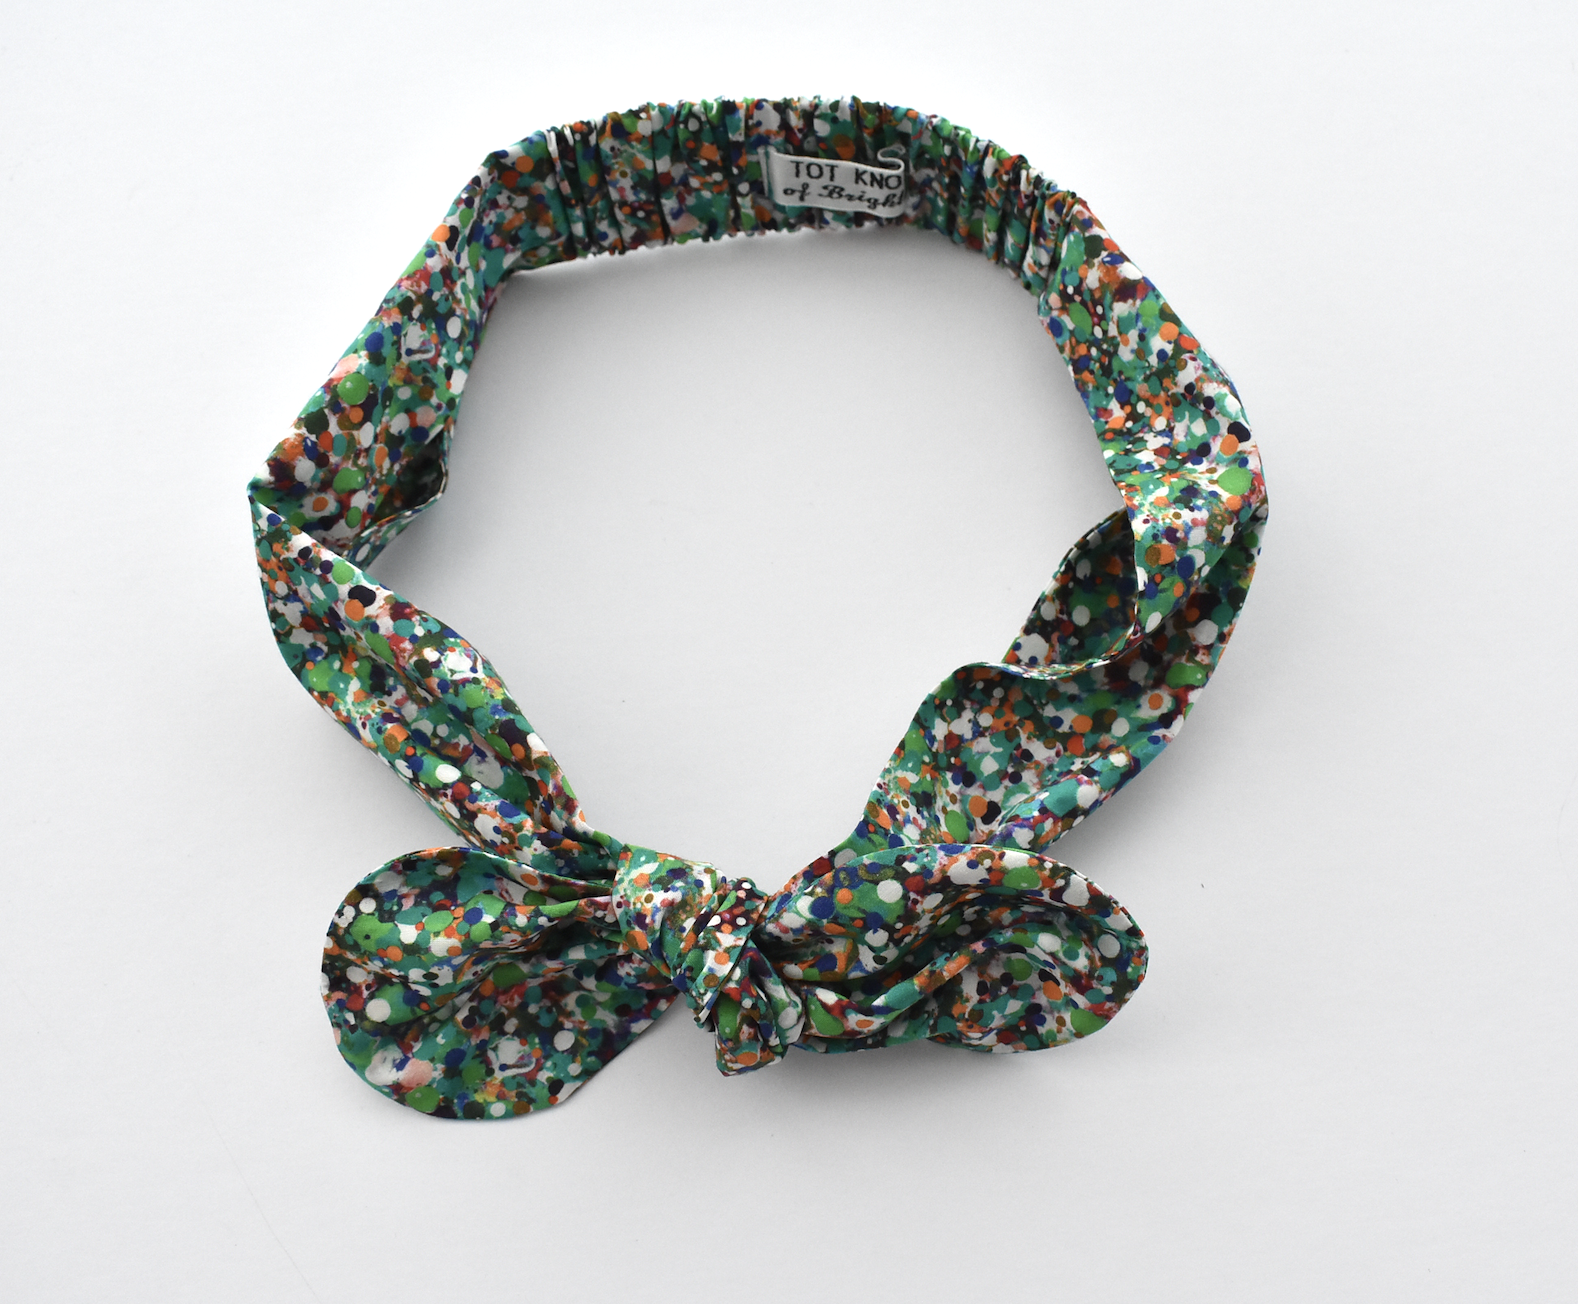 Ladies Tot Knot hairband - Liberty of London Green Spotty for Christmas - Tot Knots of Brighton